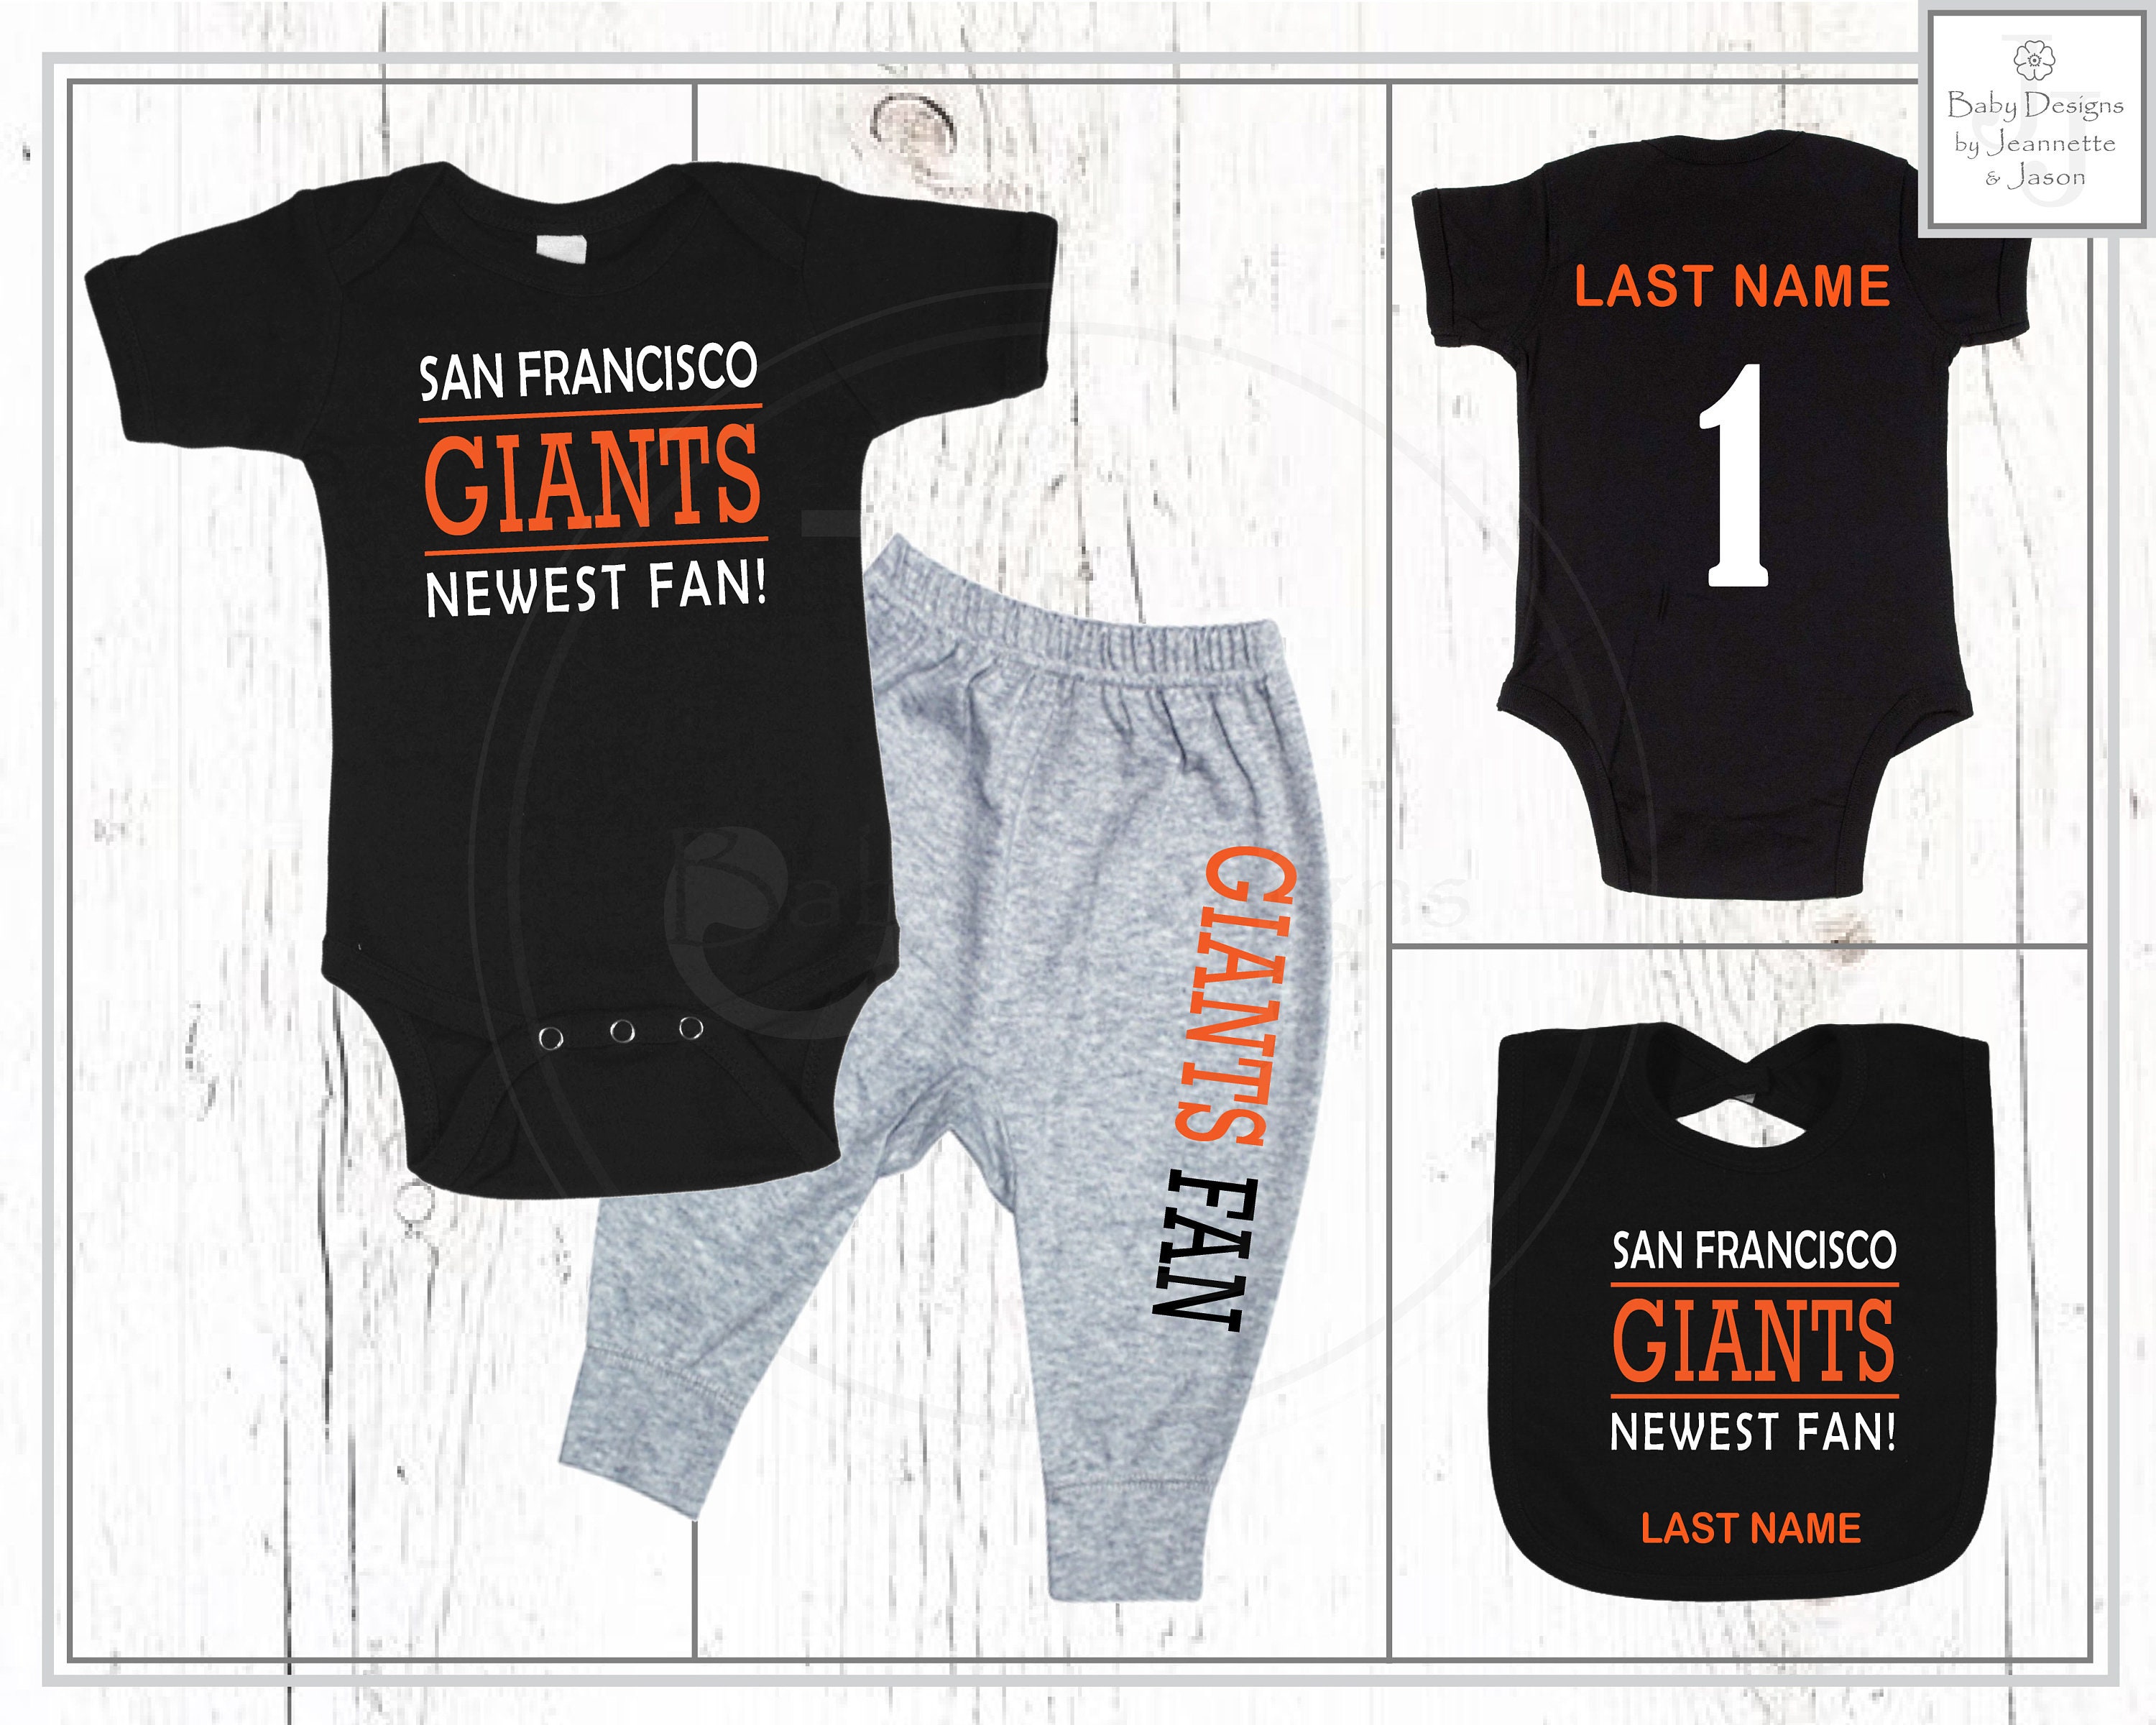  Majestic Athletic San Francisco Giants Personalized Custom  (Add Name & Number) Adult Small : Sports Fan Jerseys : Sports & Outdoors